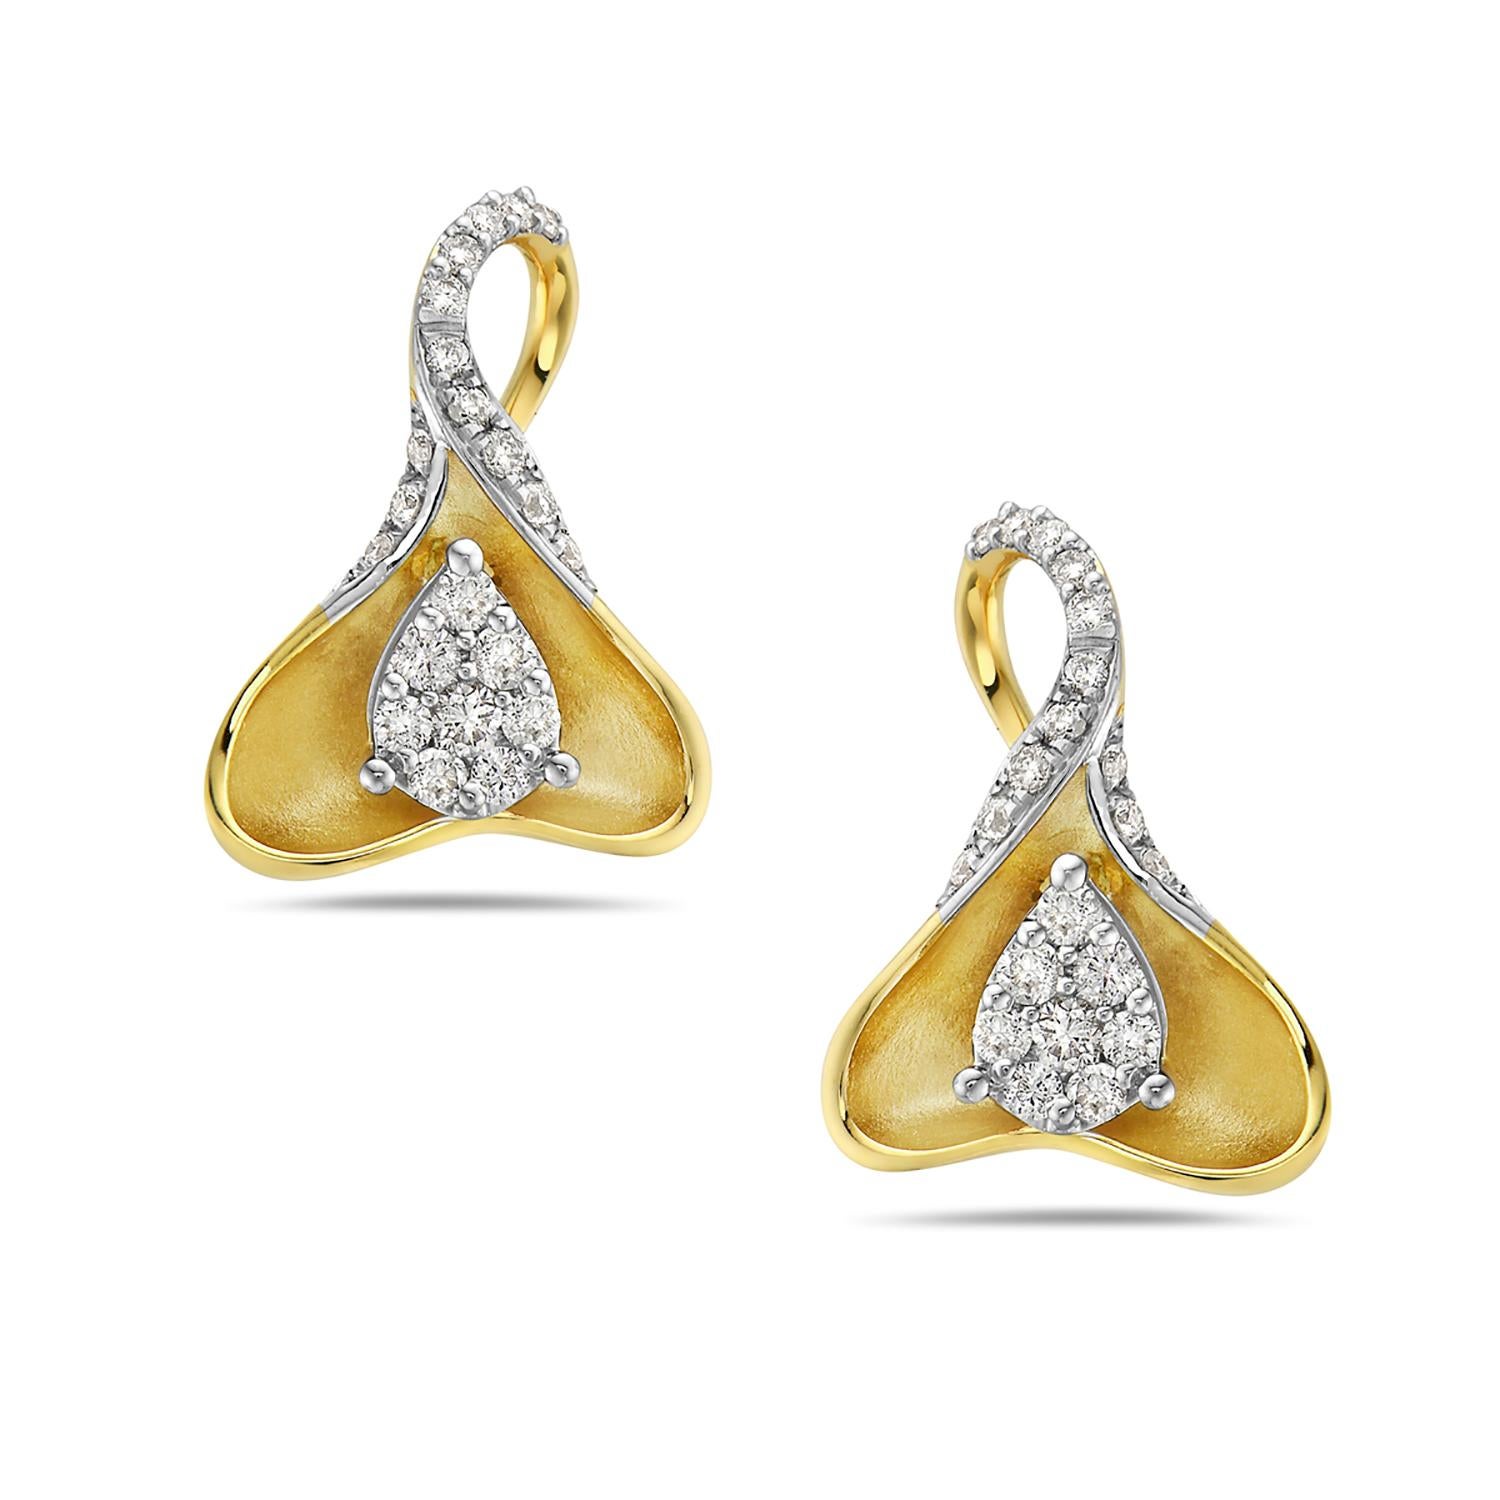 Folded Petal Shaped Stud Earrings Accented with Diamonds Made in 14k Yellow Gold In New Condition For Sale In New York, NY